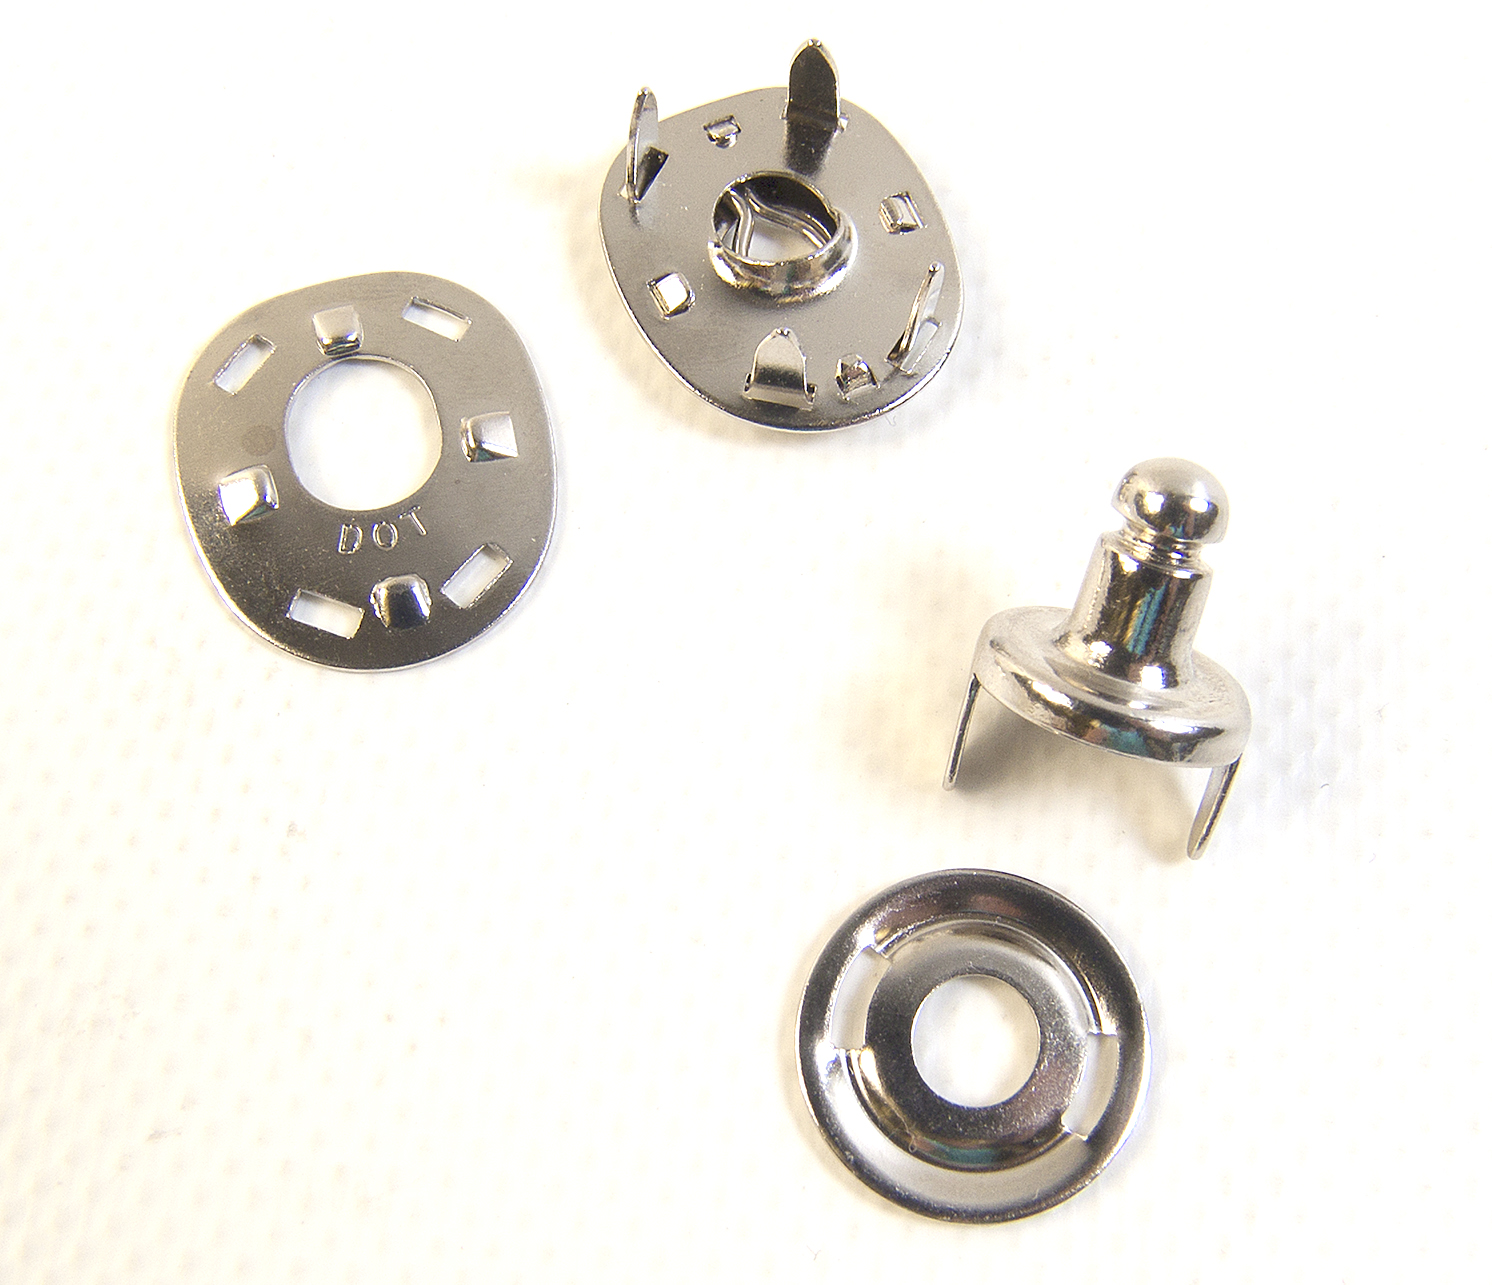 Lift The Dot Fastener Socket and Backing Plate 10 sets